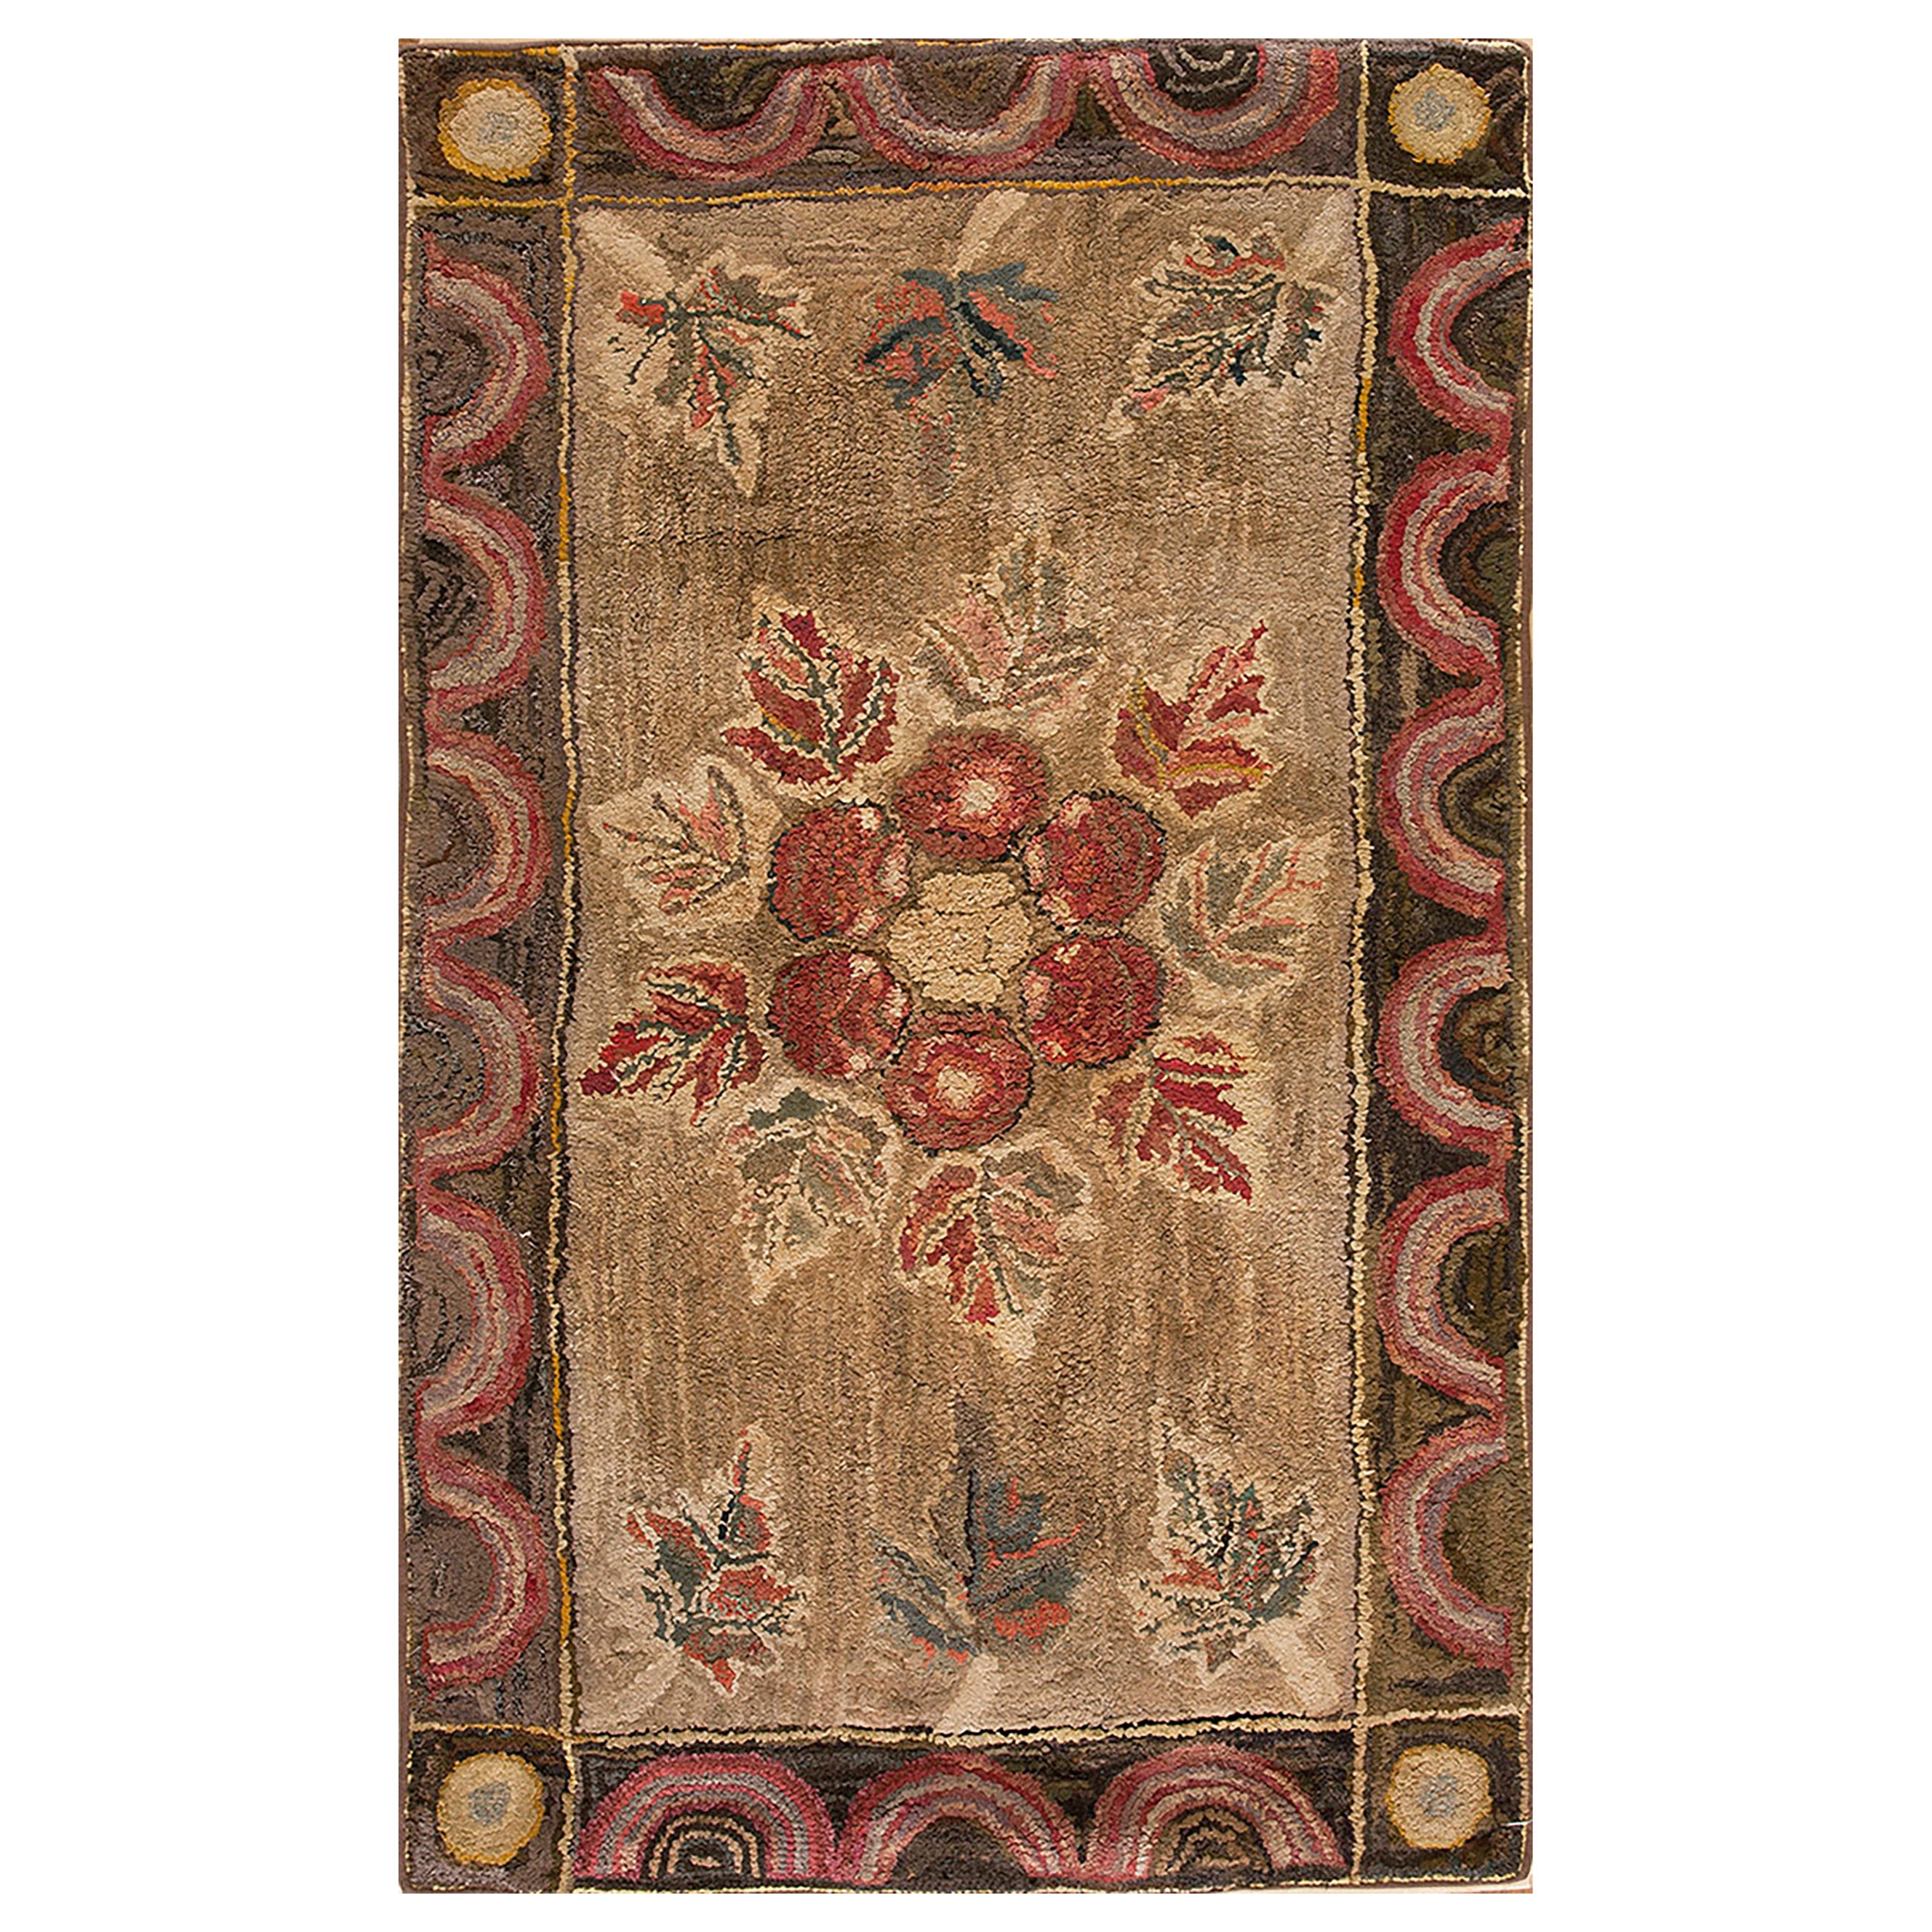  Early 20th Century American Hooked Rug 3' 2"x 5' 6"  For Sale